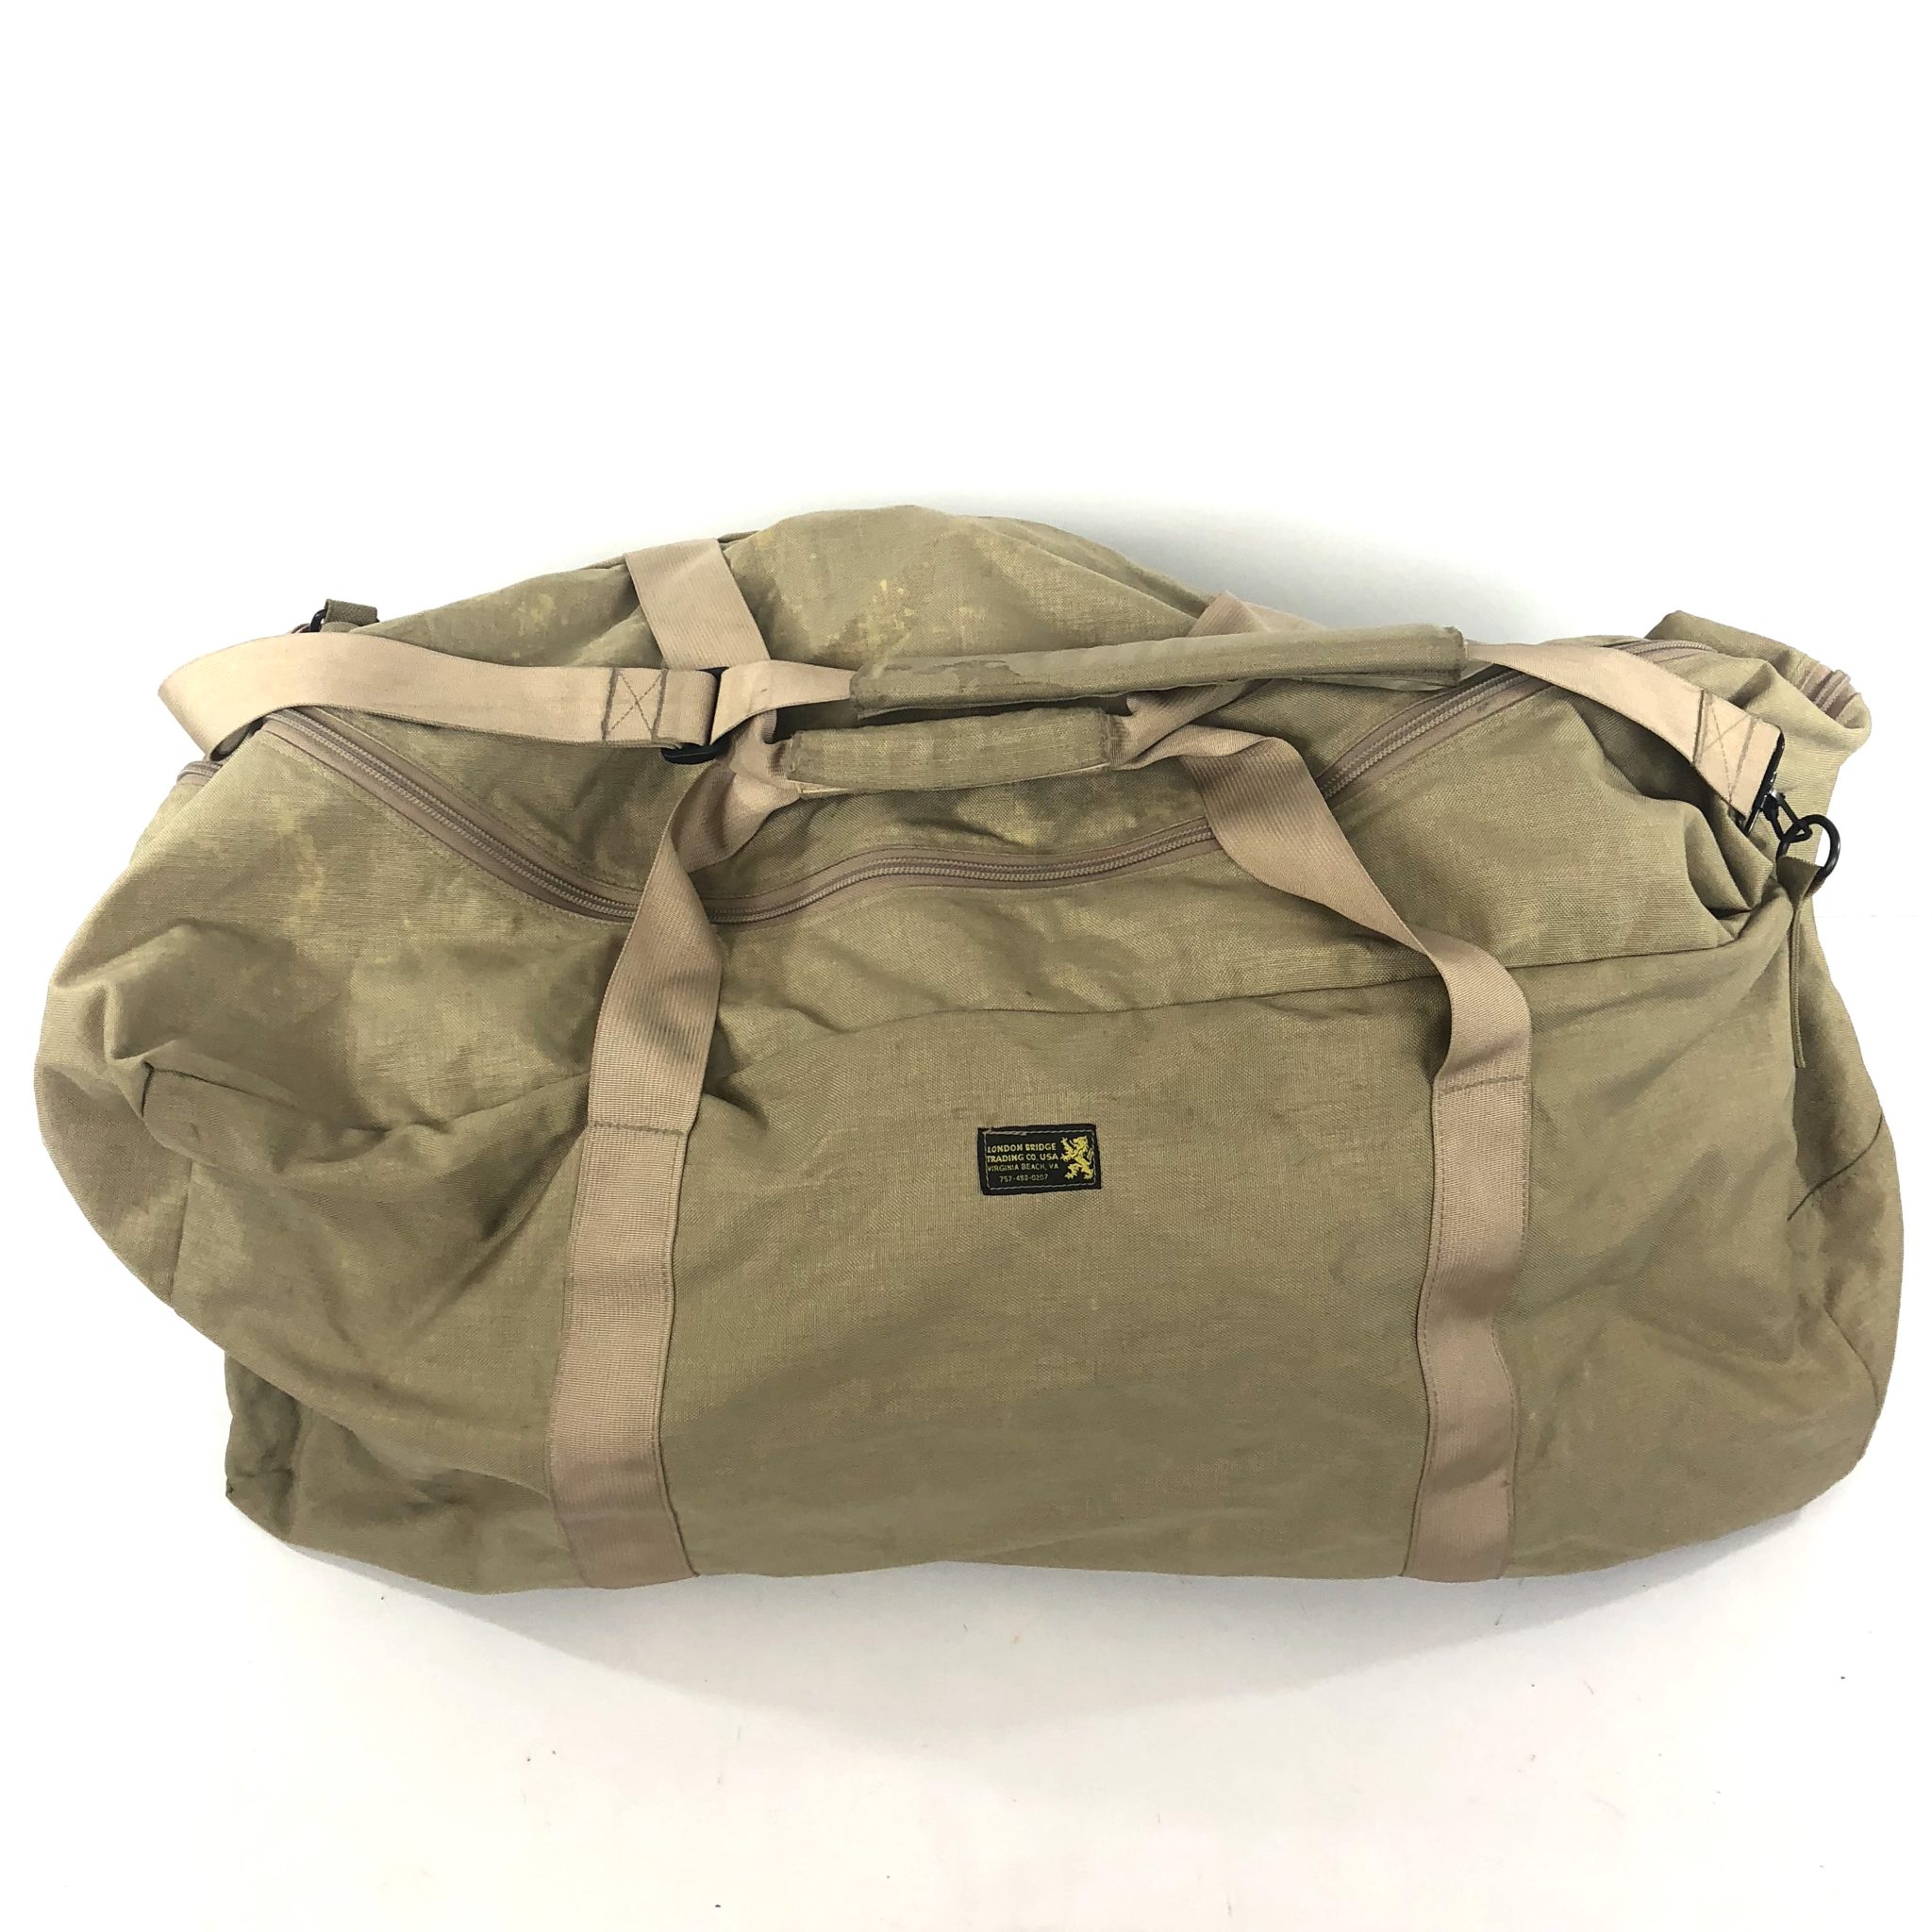 Buy a Used London Bridge Trading Duffel Bag and get Free Shipping